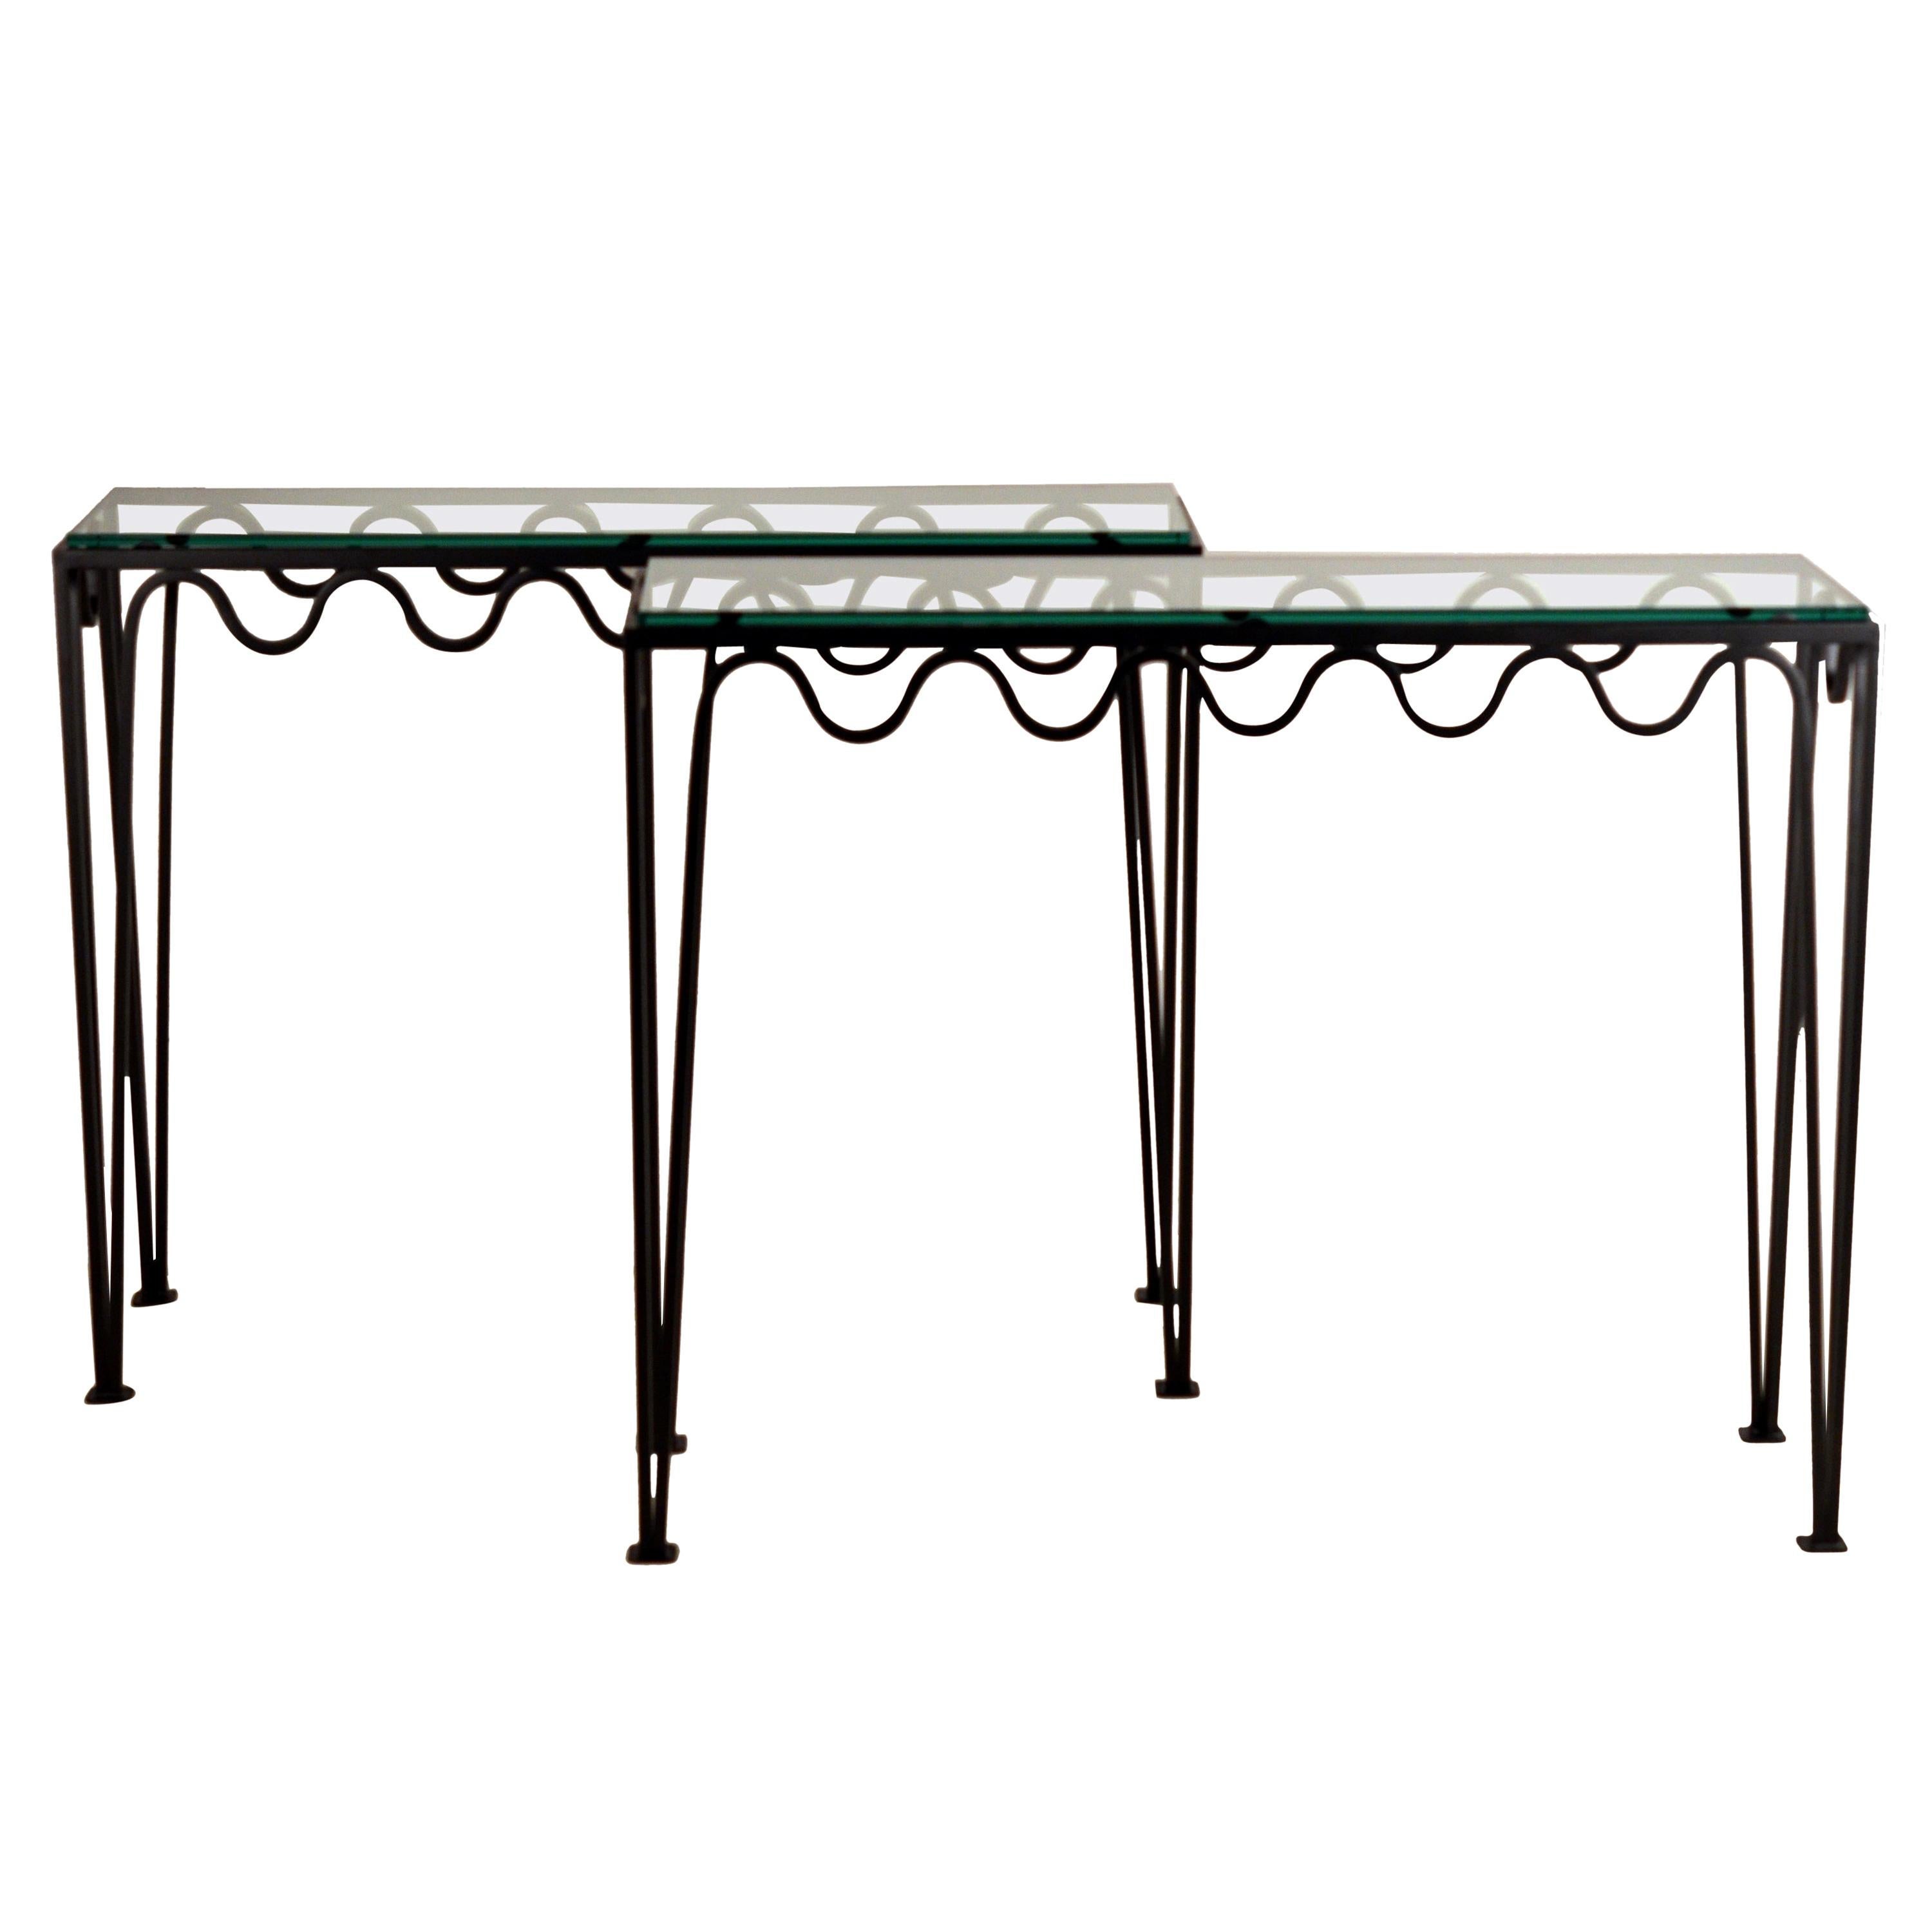 Pair of Undulating 'Méandre' Wrought Iron and Glass Consoles by Design Frères